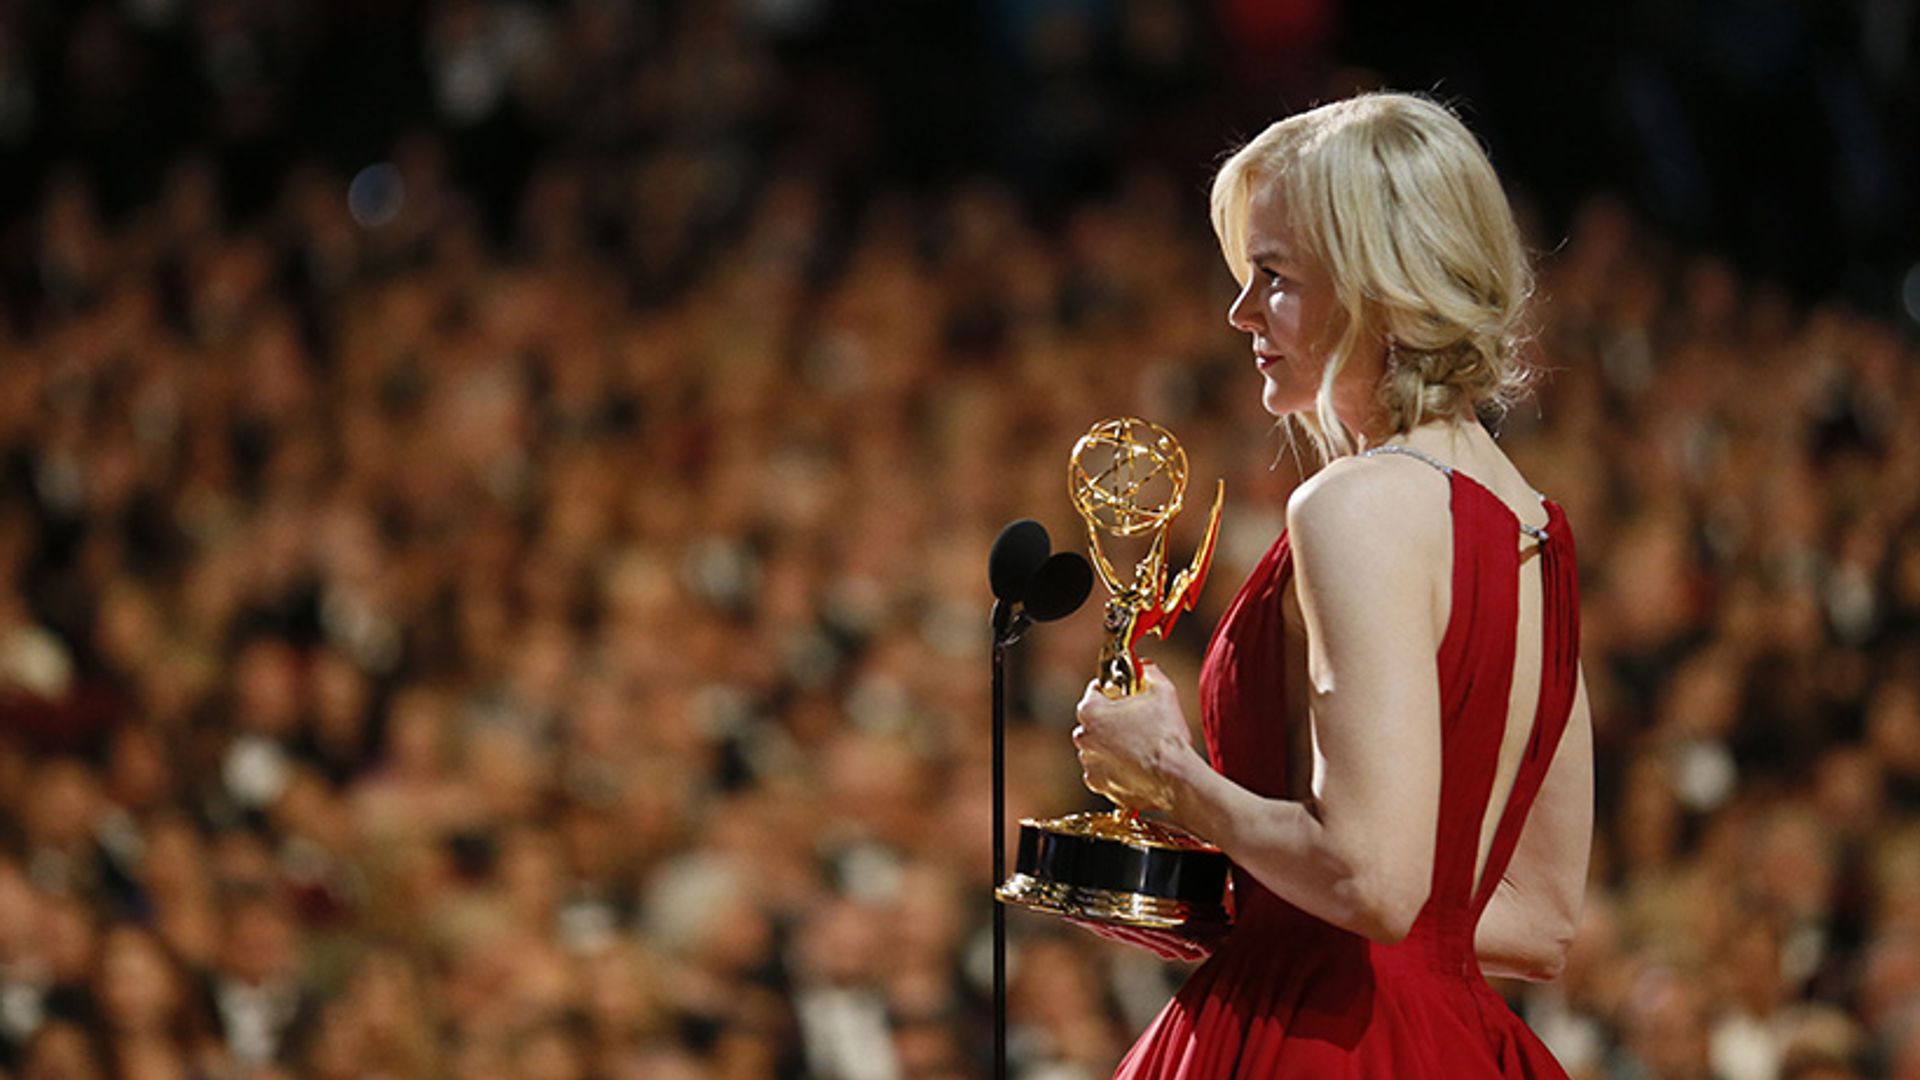 Find out which shows won big at the Emmys